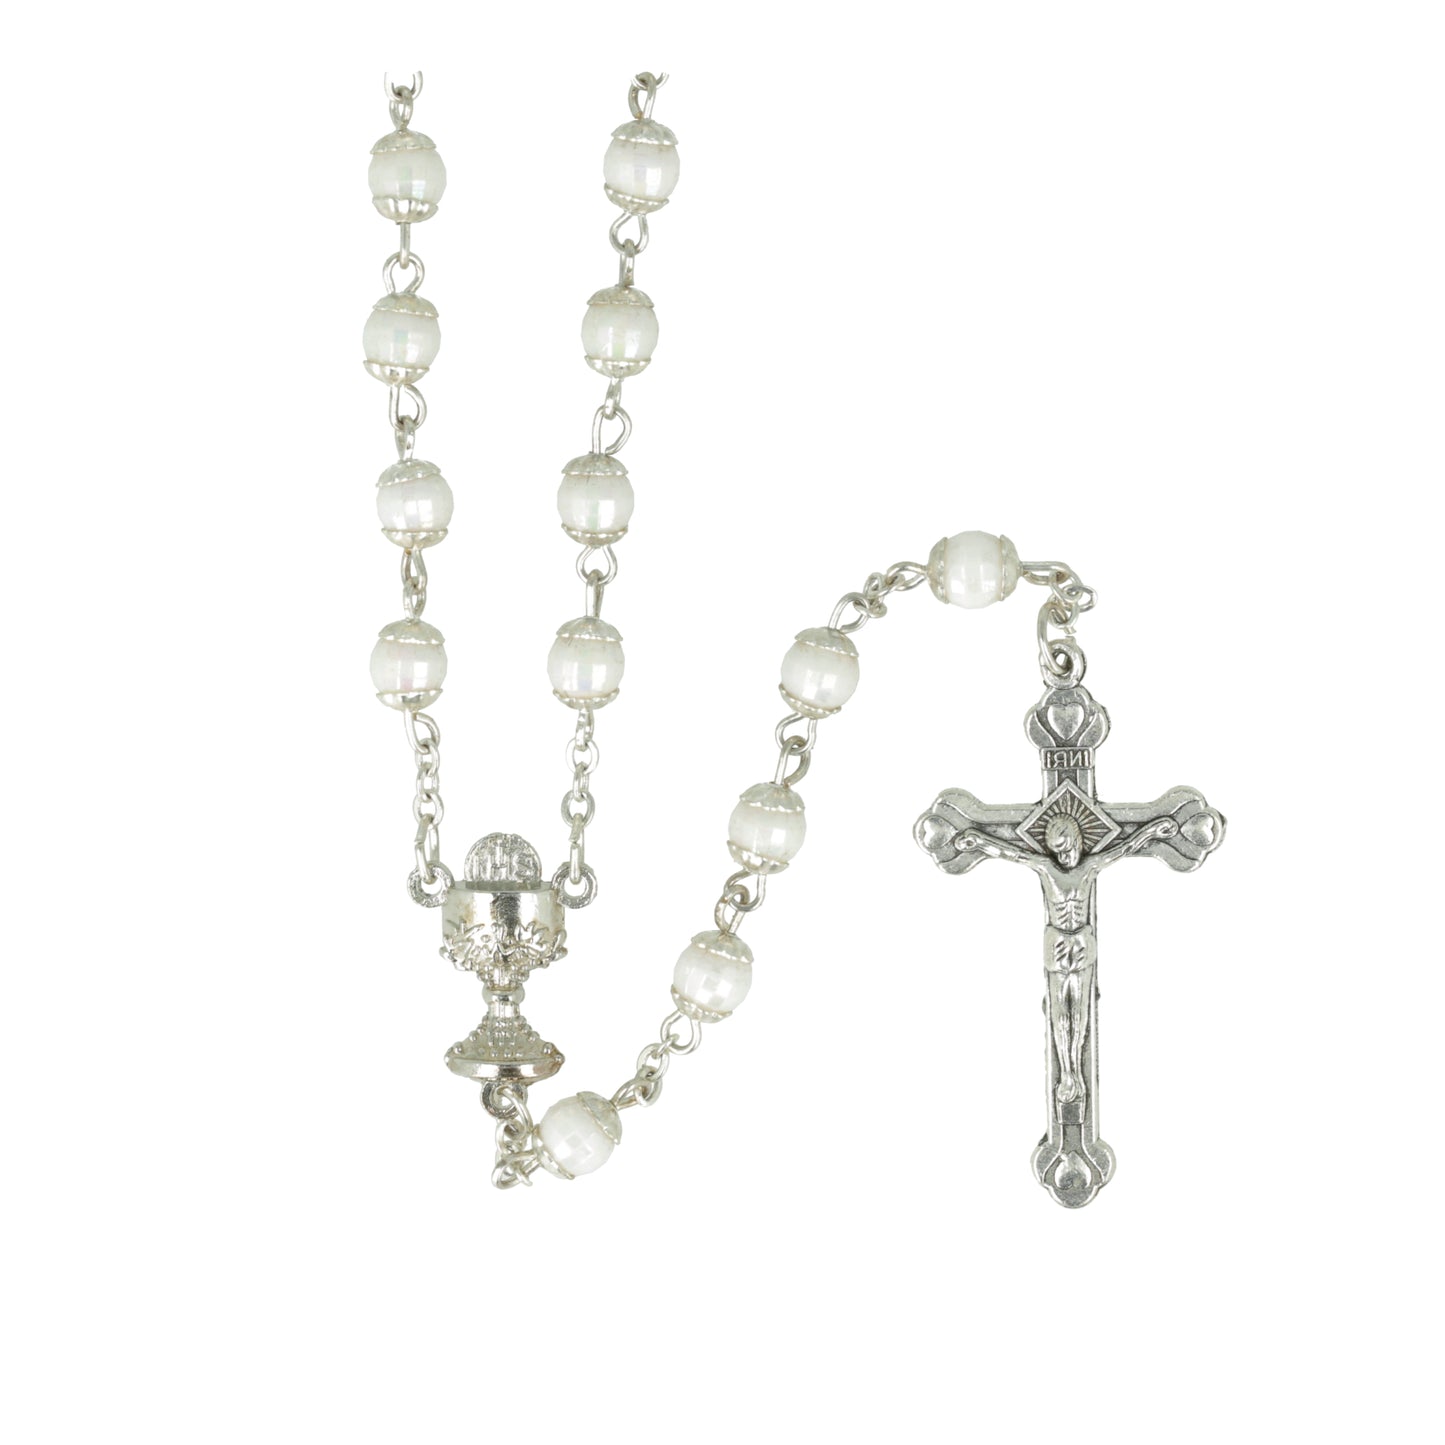 Rosary Communion Center Chalice And Cross. Souvenirs from Italy